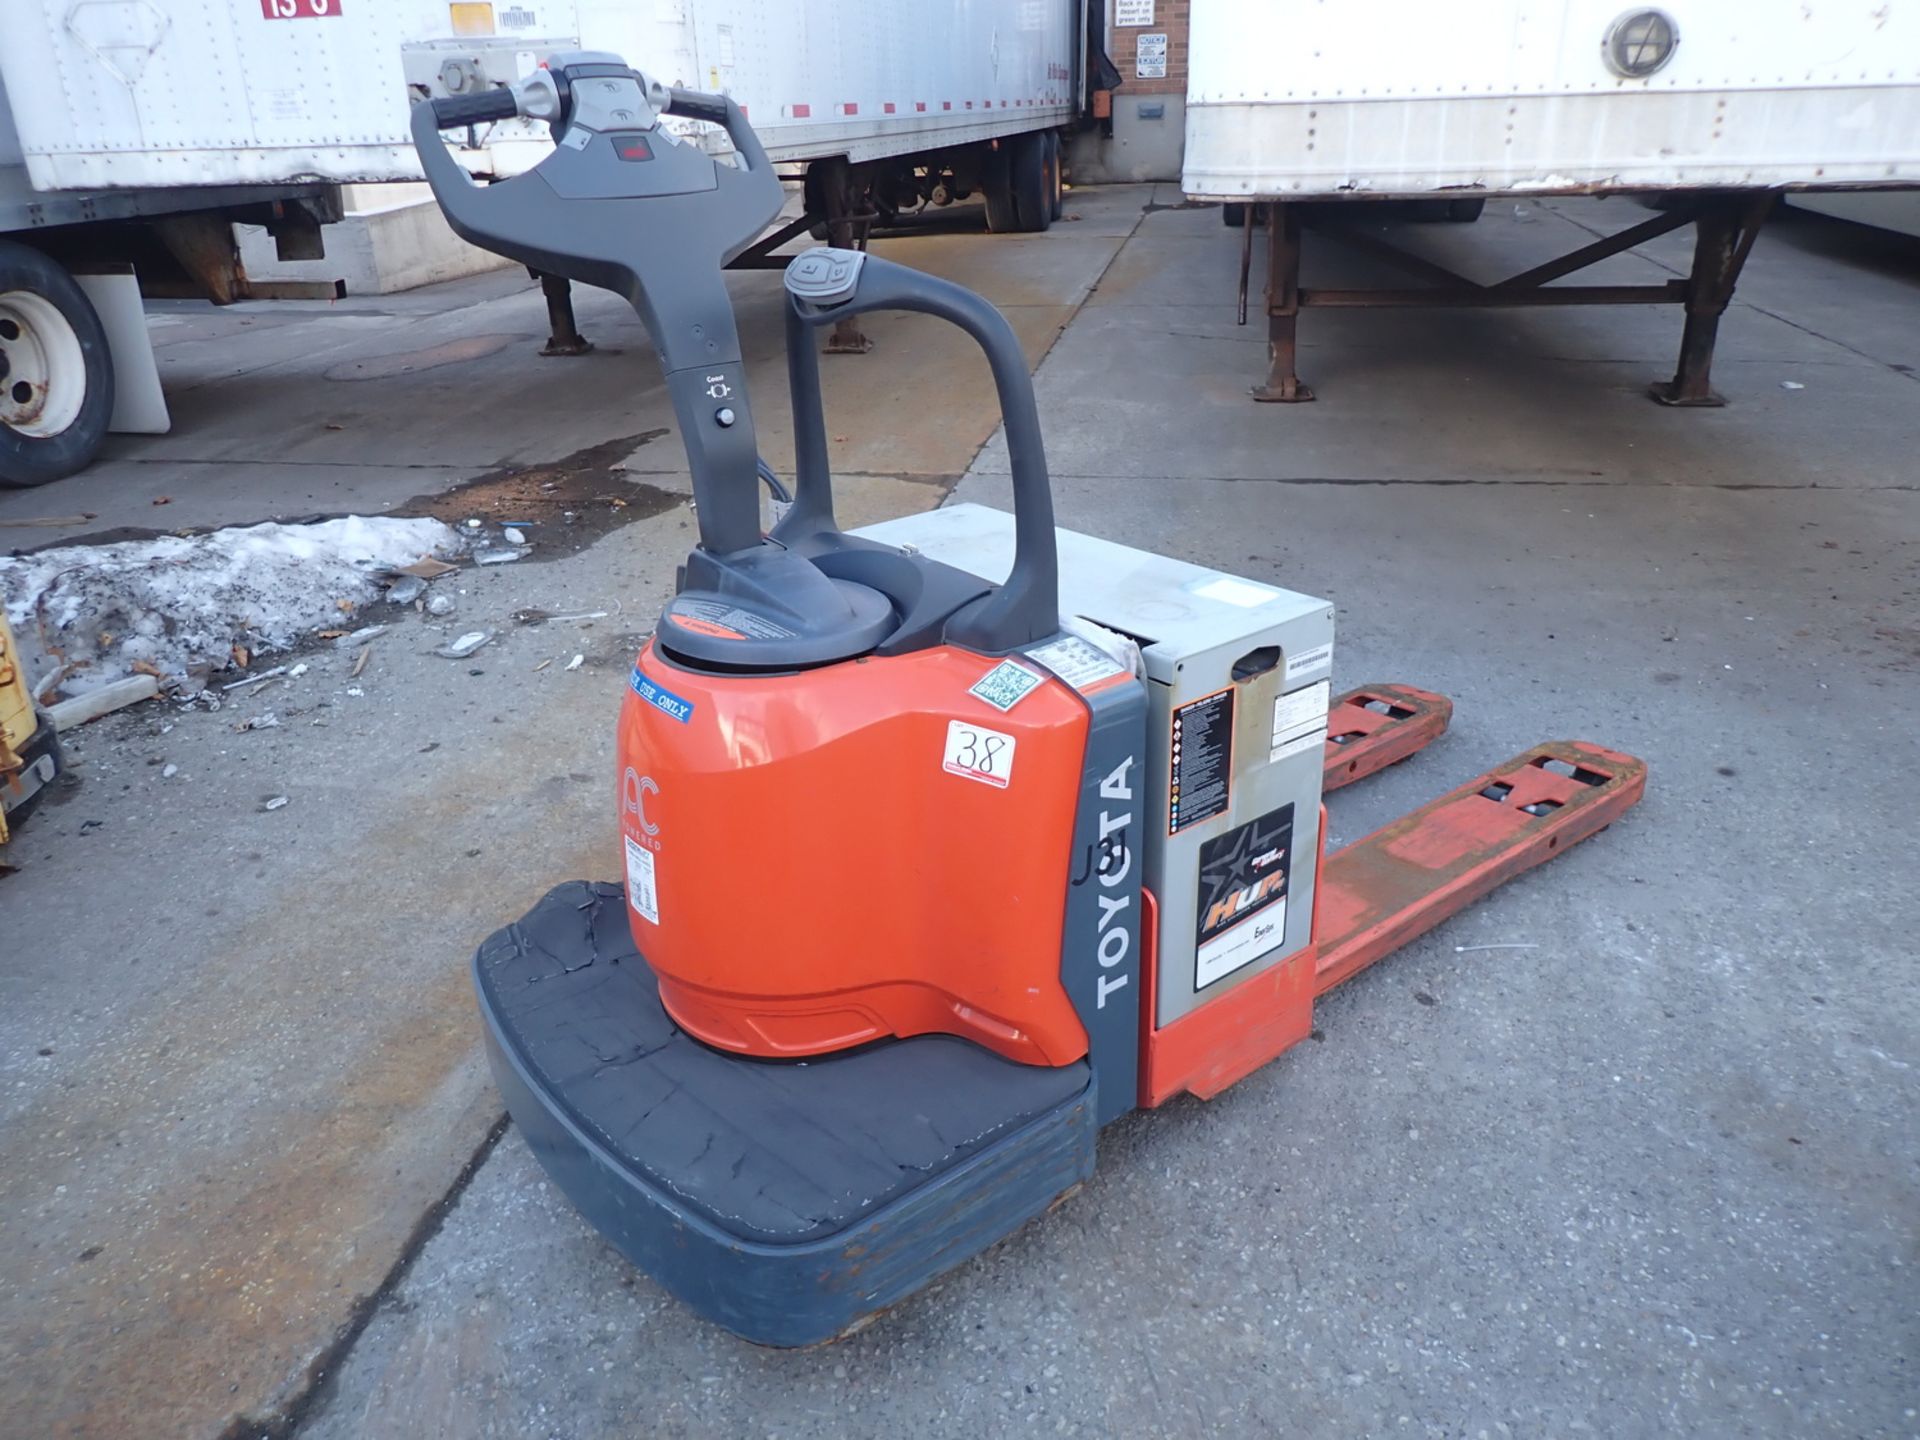 TOYOTA 8HBE30 6,000LBS CAP ELECTRIC RIDE-ON PALLET TRUCK (24V) W/ 4'L FORKS, S/N 51280 (NO CHARGER)